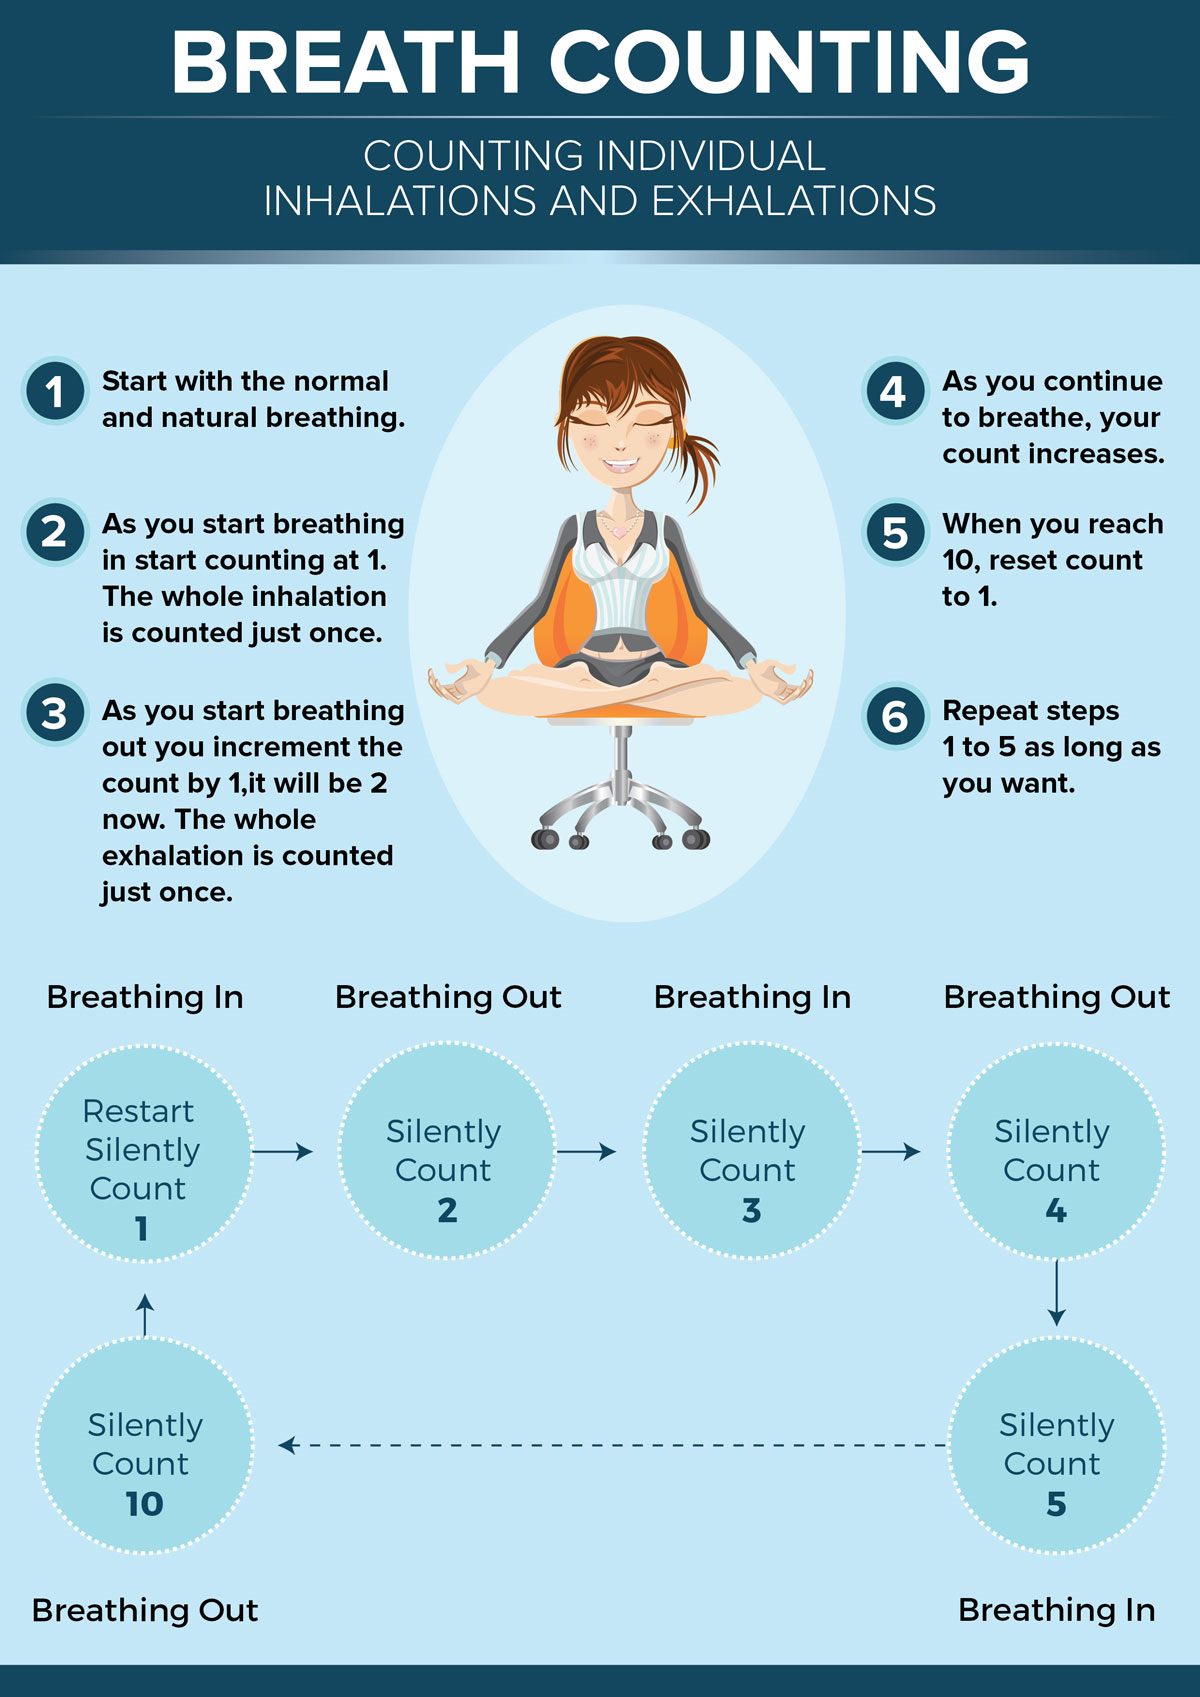 Breath counting can help you keep calm